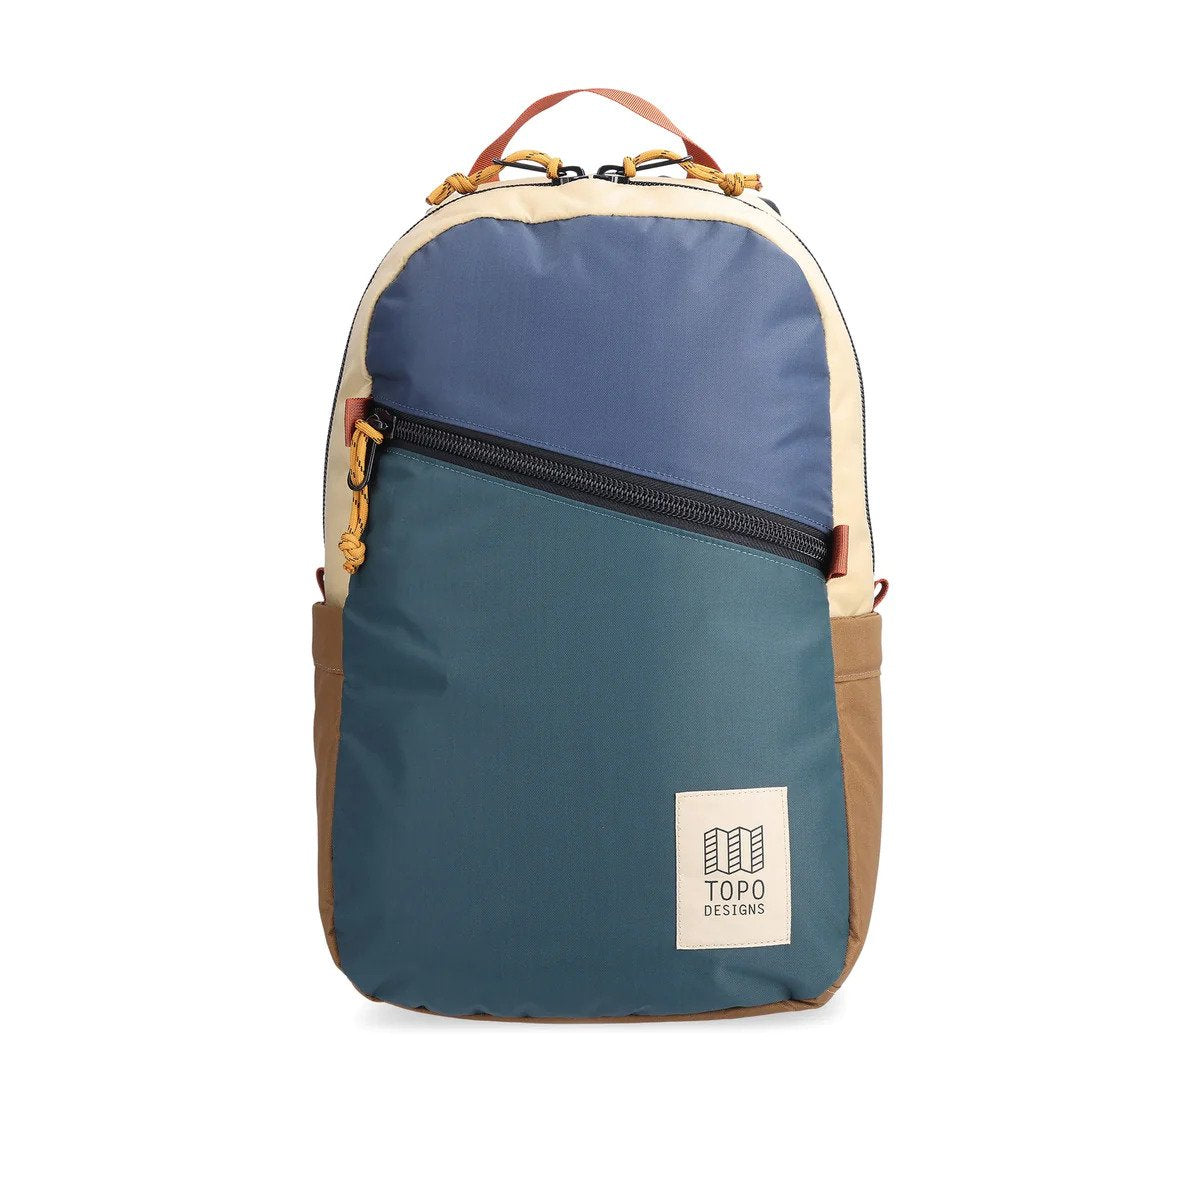 Front view of Topo Designs Light Pack in recycled "Pond Blue / Botanic Green" nylon.